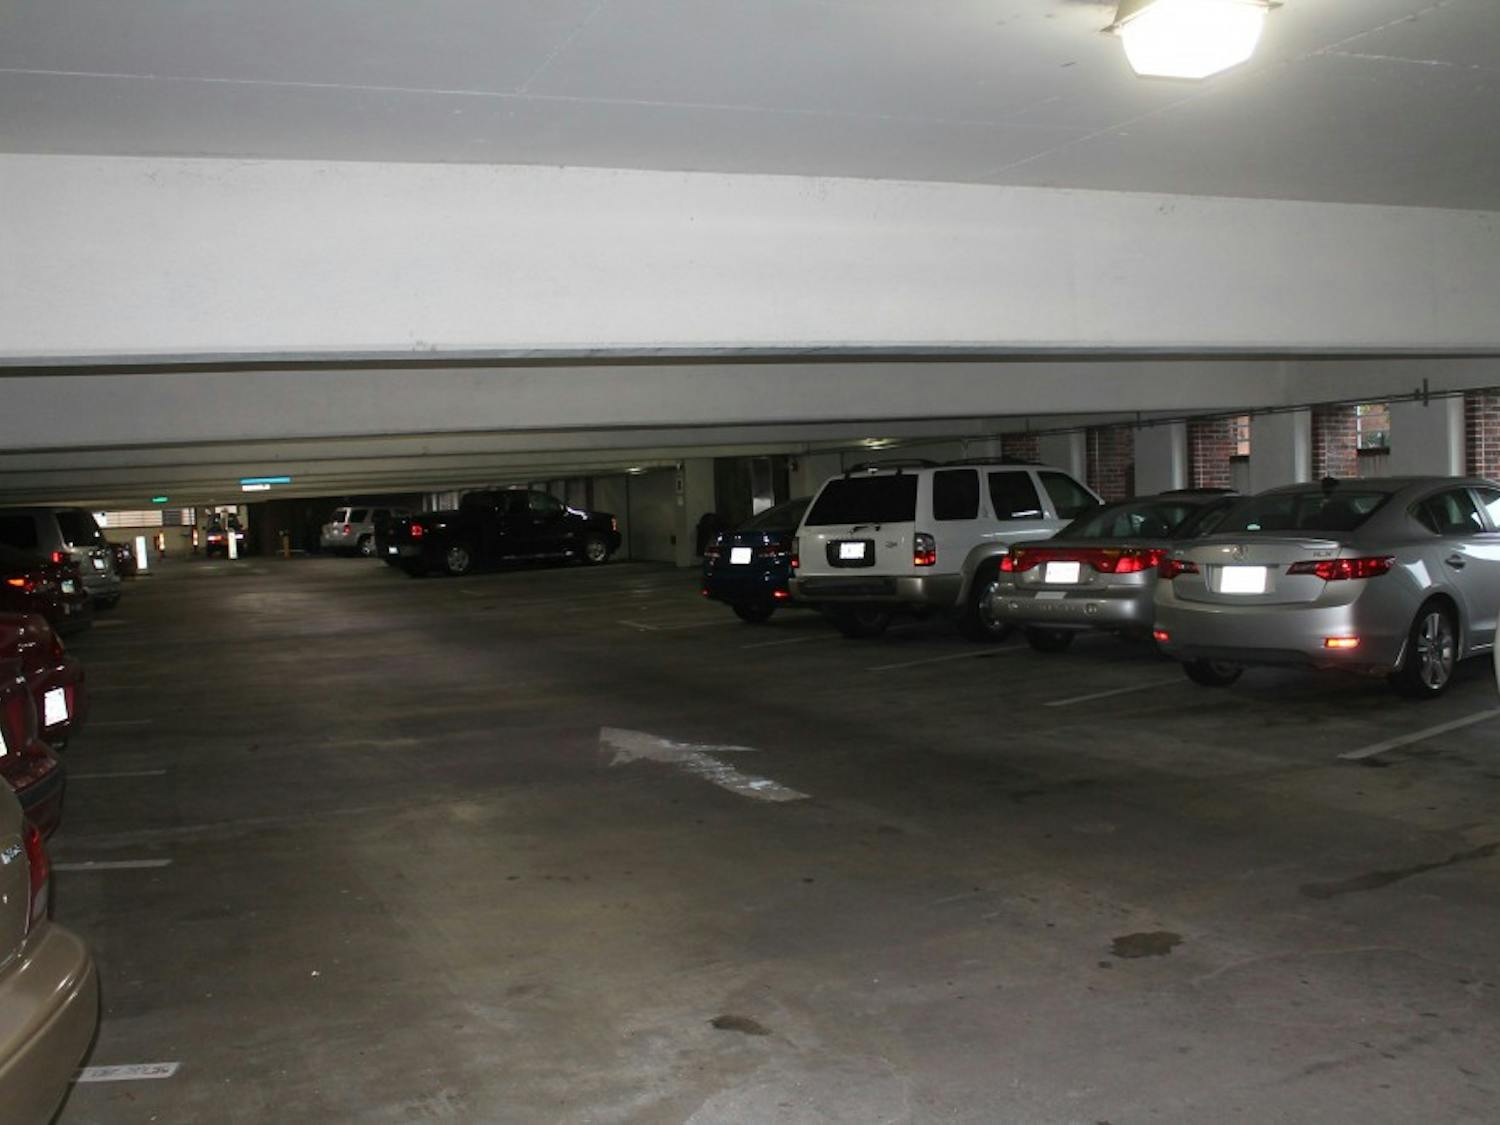 Cars parked in the Wallace Parking Deck on E. Rosemary St.&nbsp;